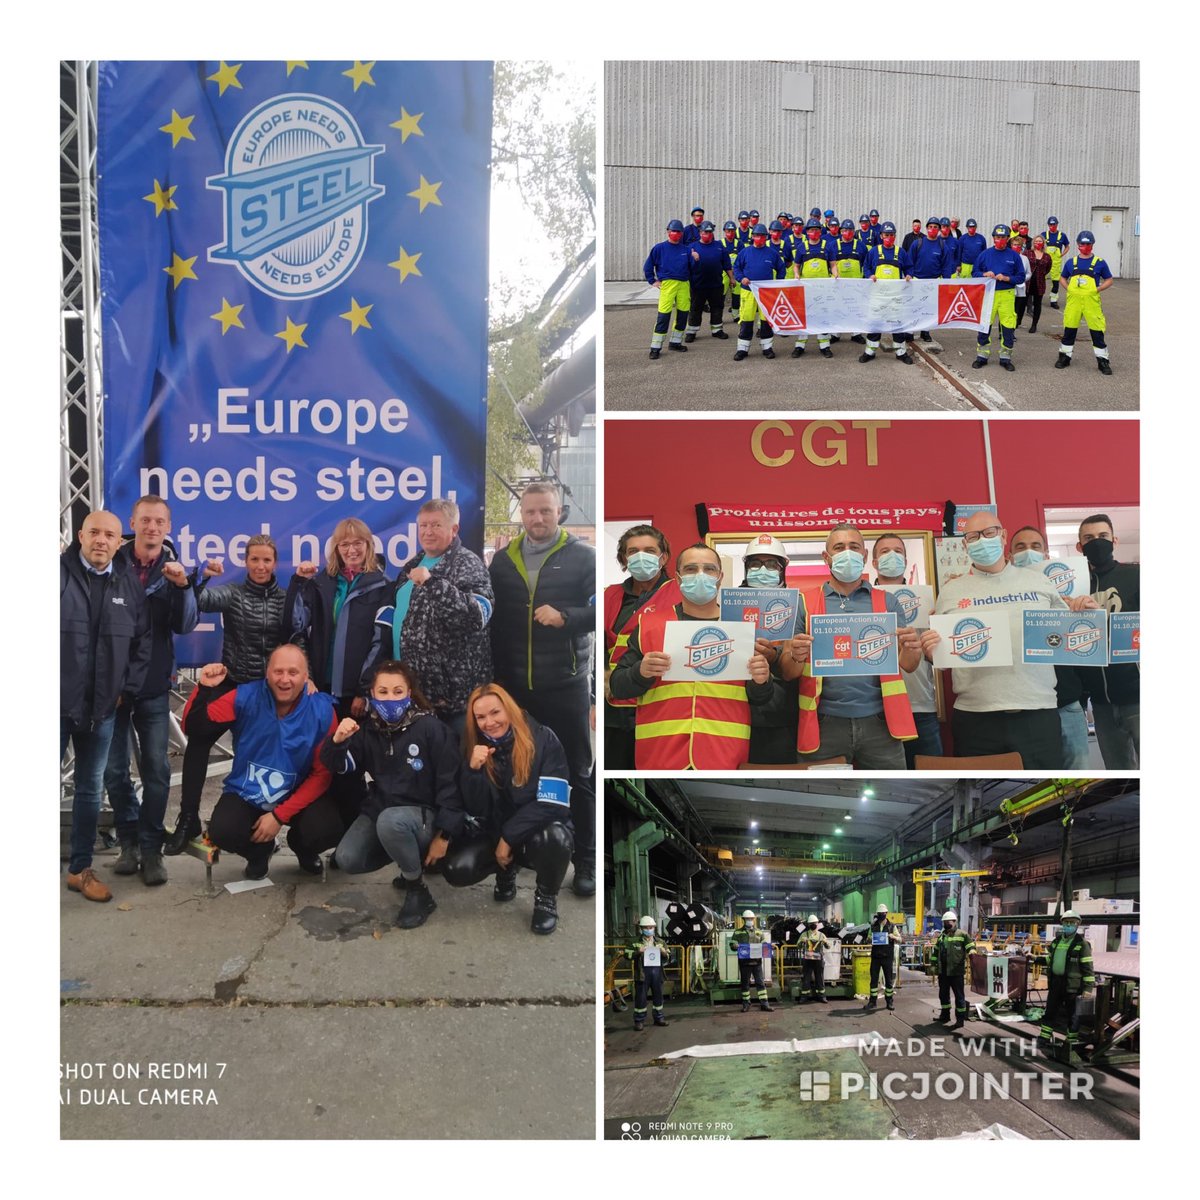 Fantastic to see @industriall_eu steelworkers from across Europe north, south, east and west standing together today to call for our leaders to:
- safeguarding our jobs
- tackling unfair trade
- giving us a pathway to green steel made in Europe #SteelNeedsEuropeNeedsSteel